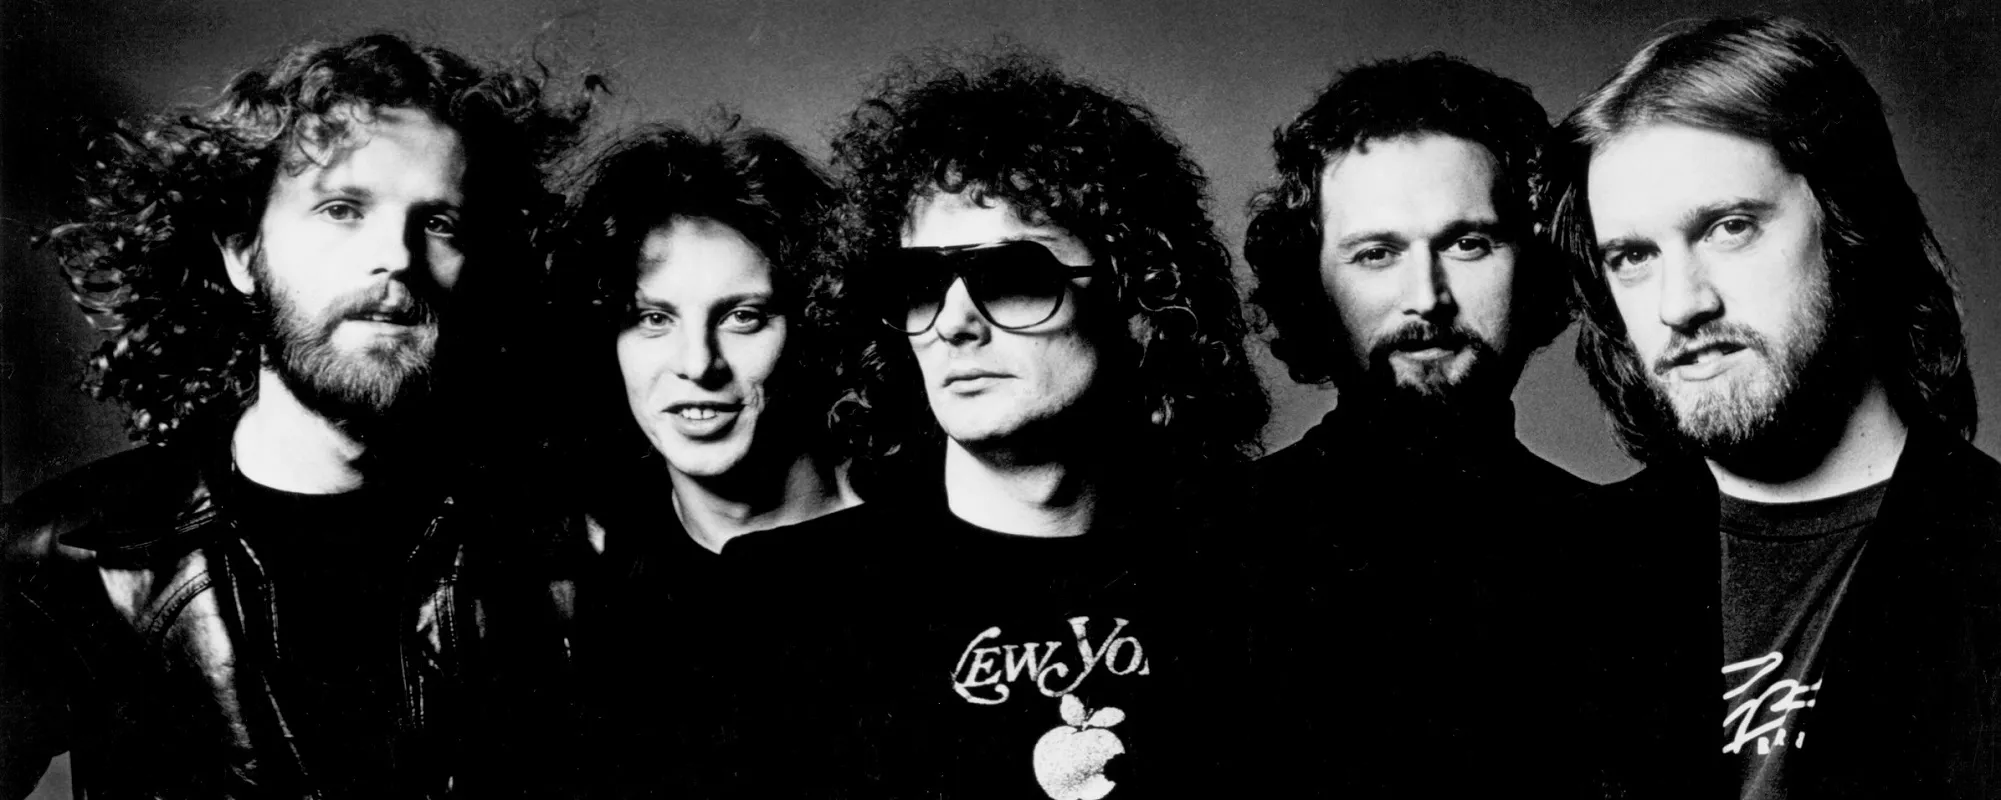 Myles Goodwyn, Frontman of the Canadian Rock Band April Wine, Dead at 75